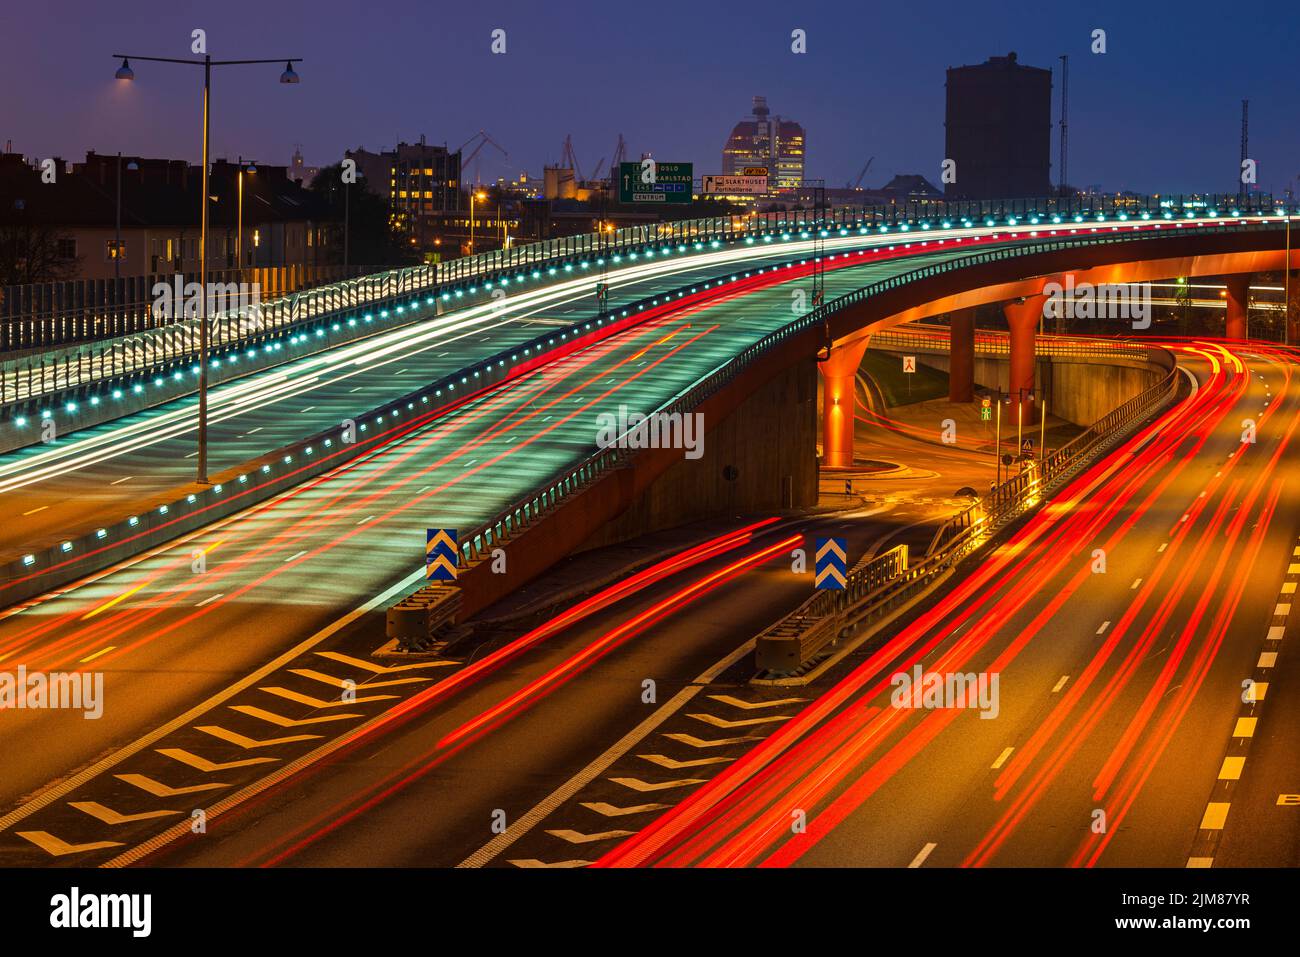 Illuminated city overpass in the evening with light trails Stock Photo